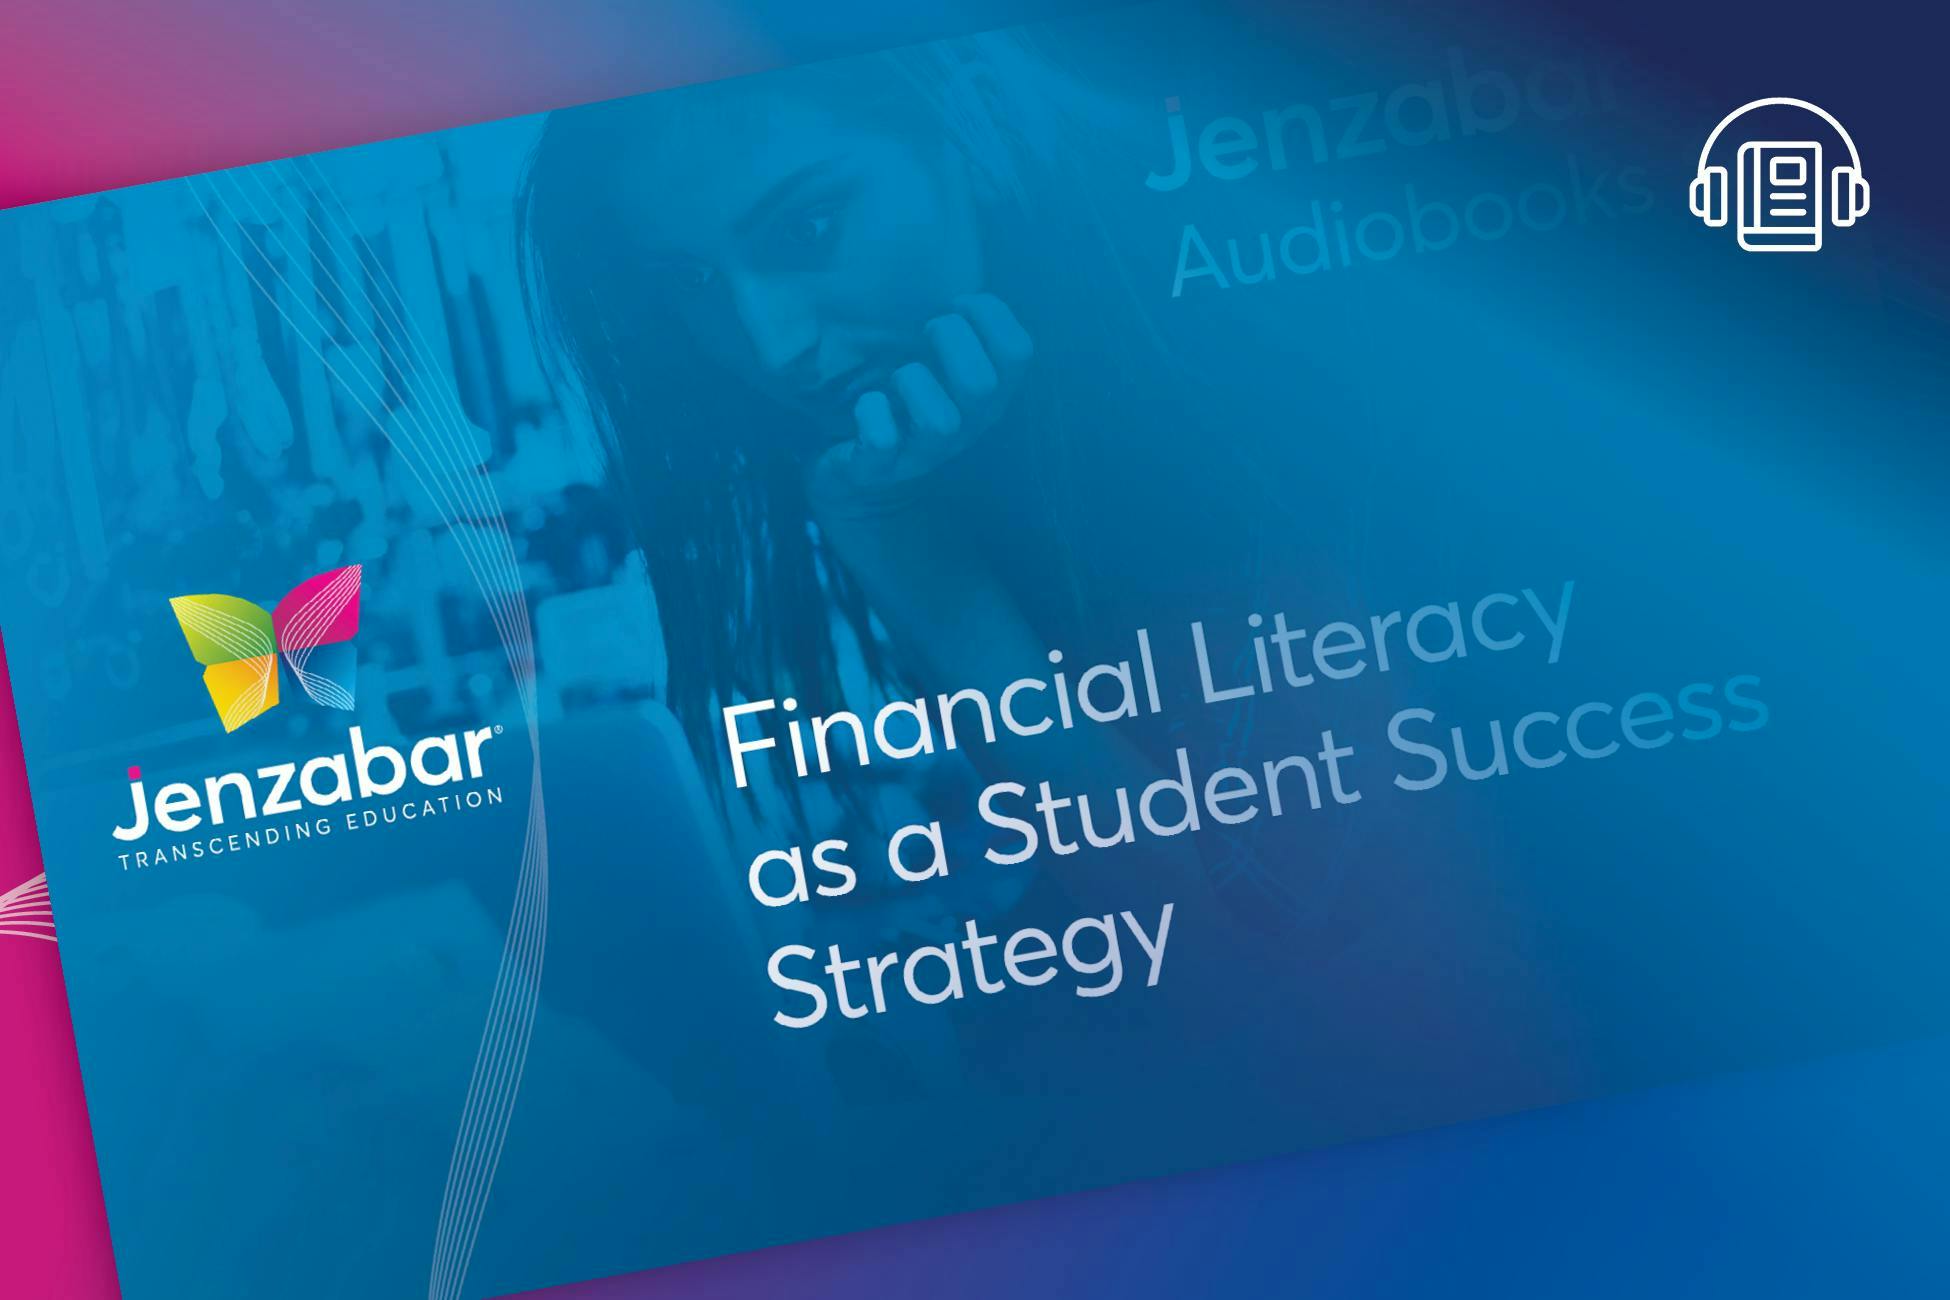 Audiobook: Financial Literacy as a Student Success Strategy